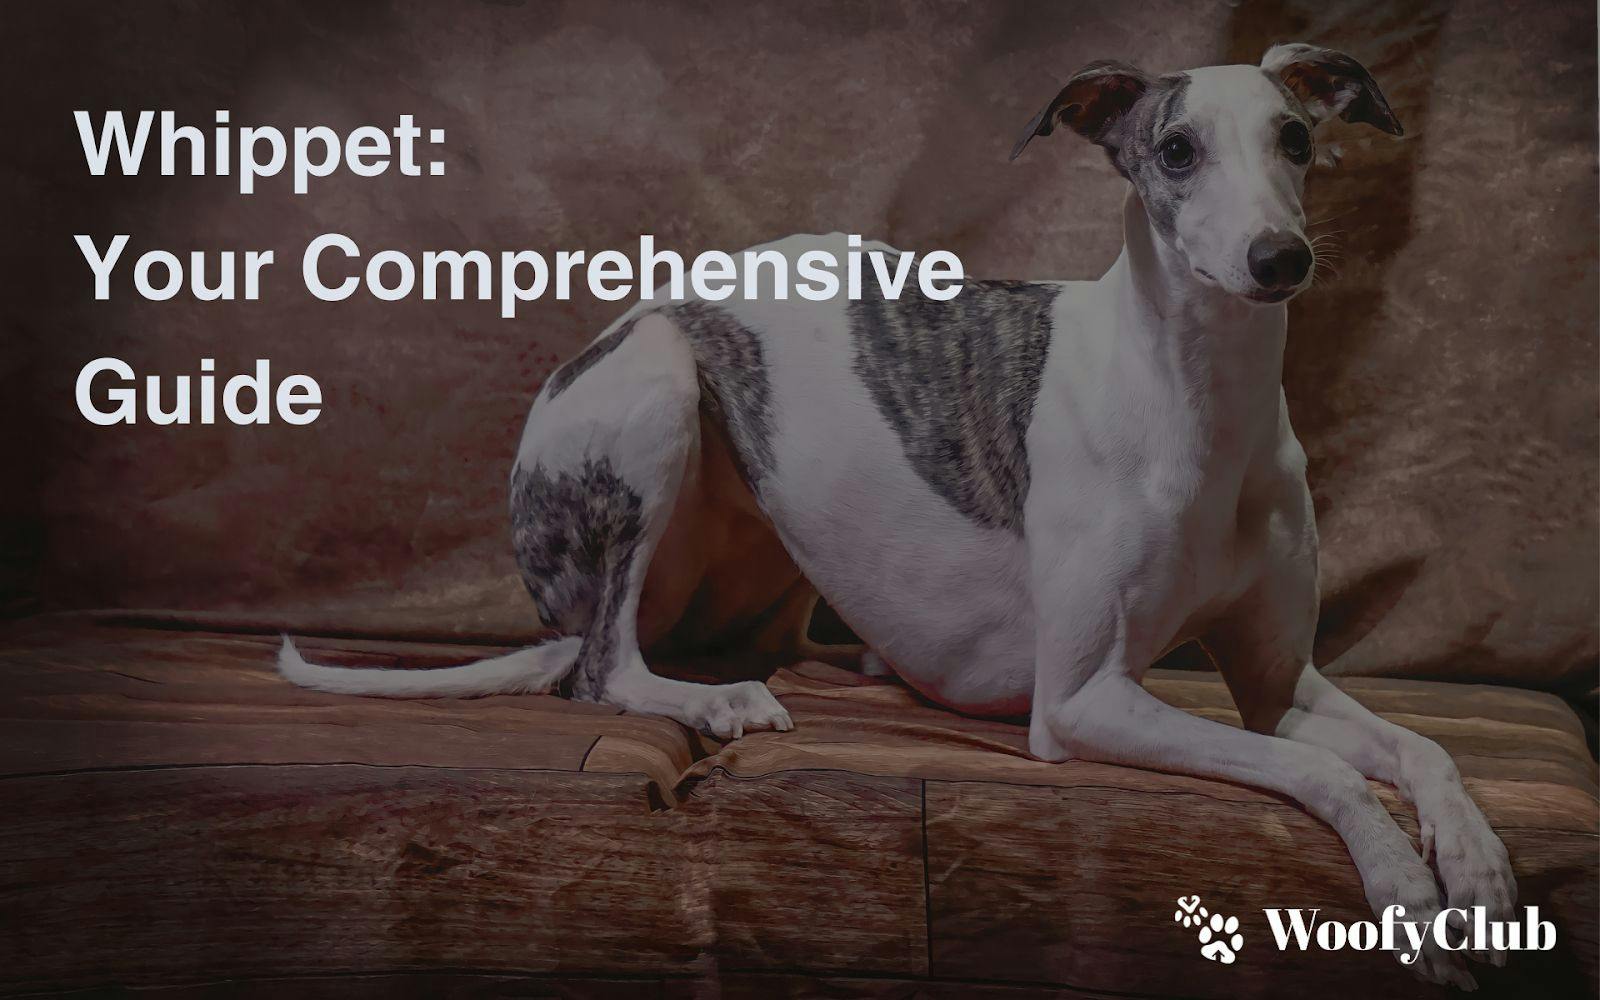 Whippet: Your Comprehensive Guide